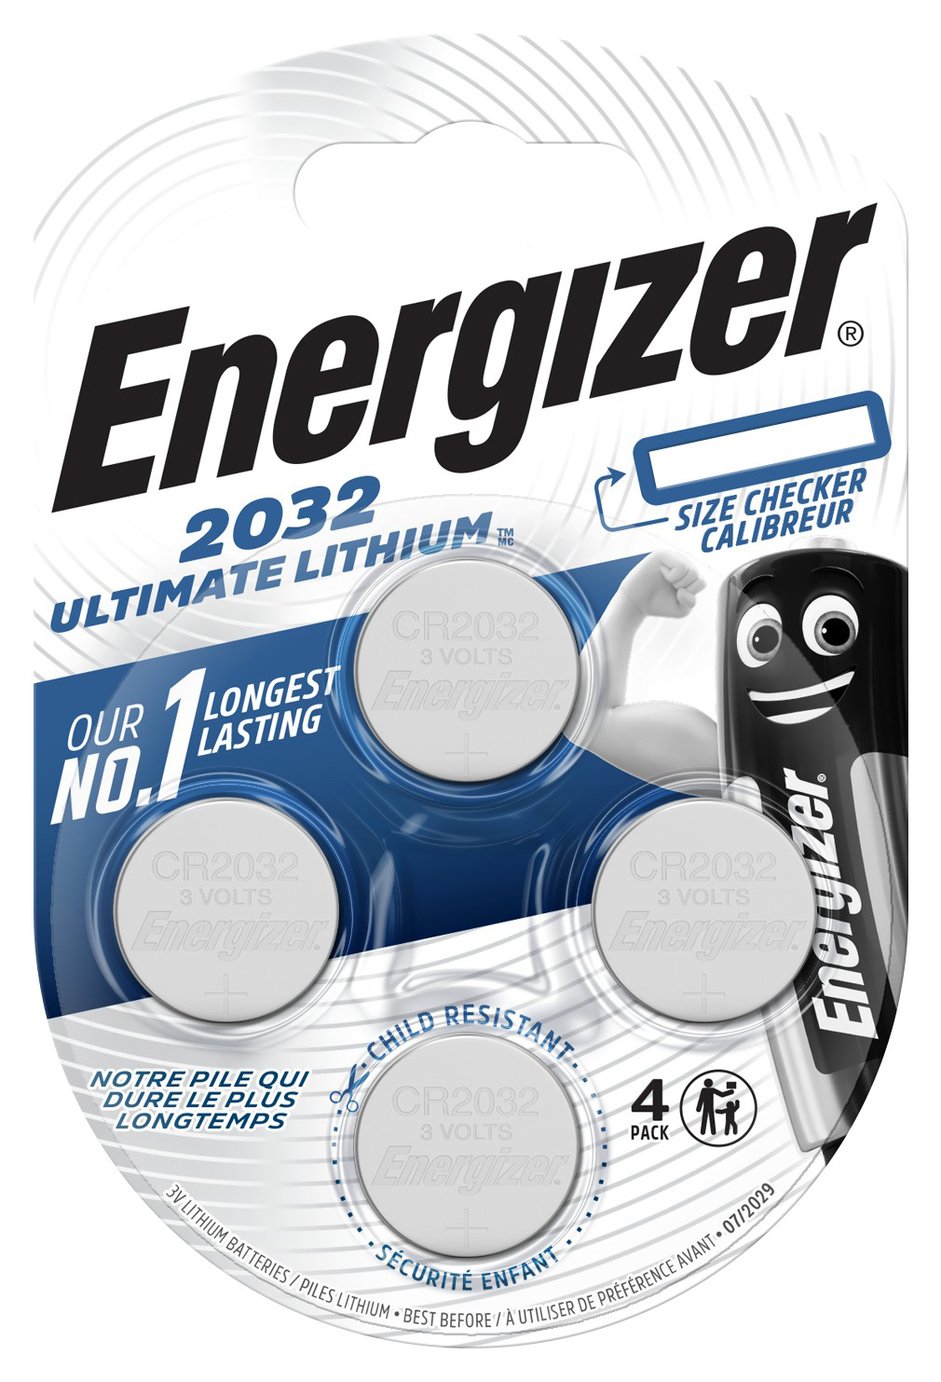 Energizer Ultimate Lithium 2032 Batteries Review